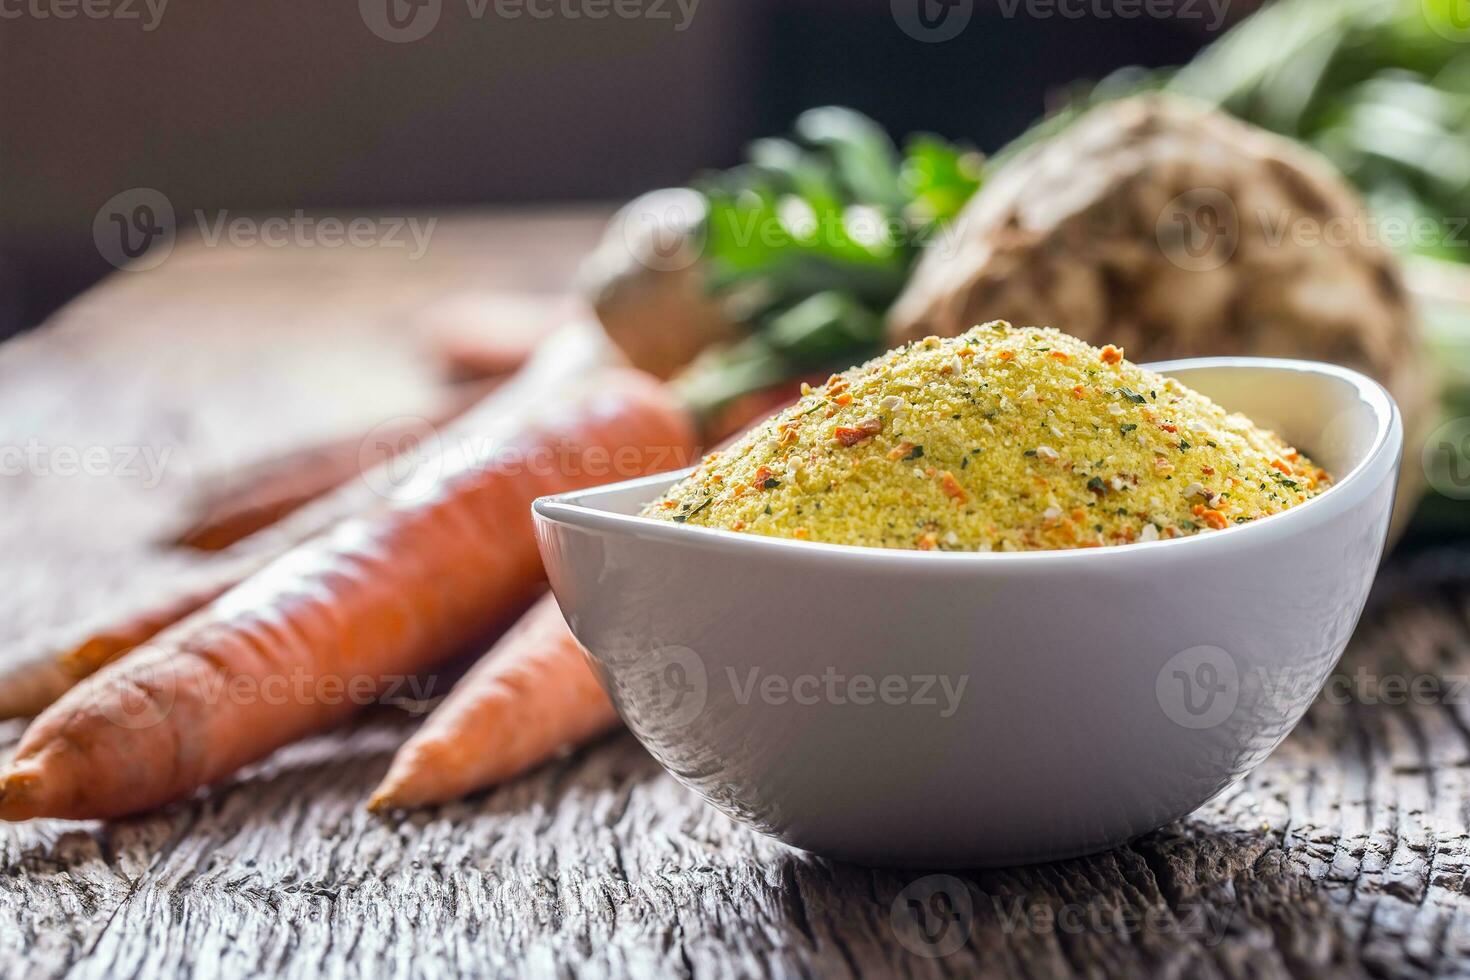 Vegeta seasoning spices condiment with dehydrated carrot parsley celery parsnips and salt with or without glutamate photo